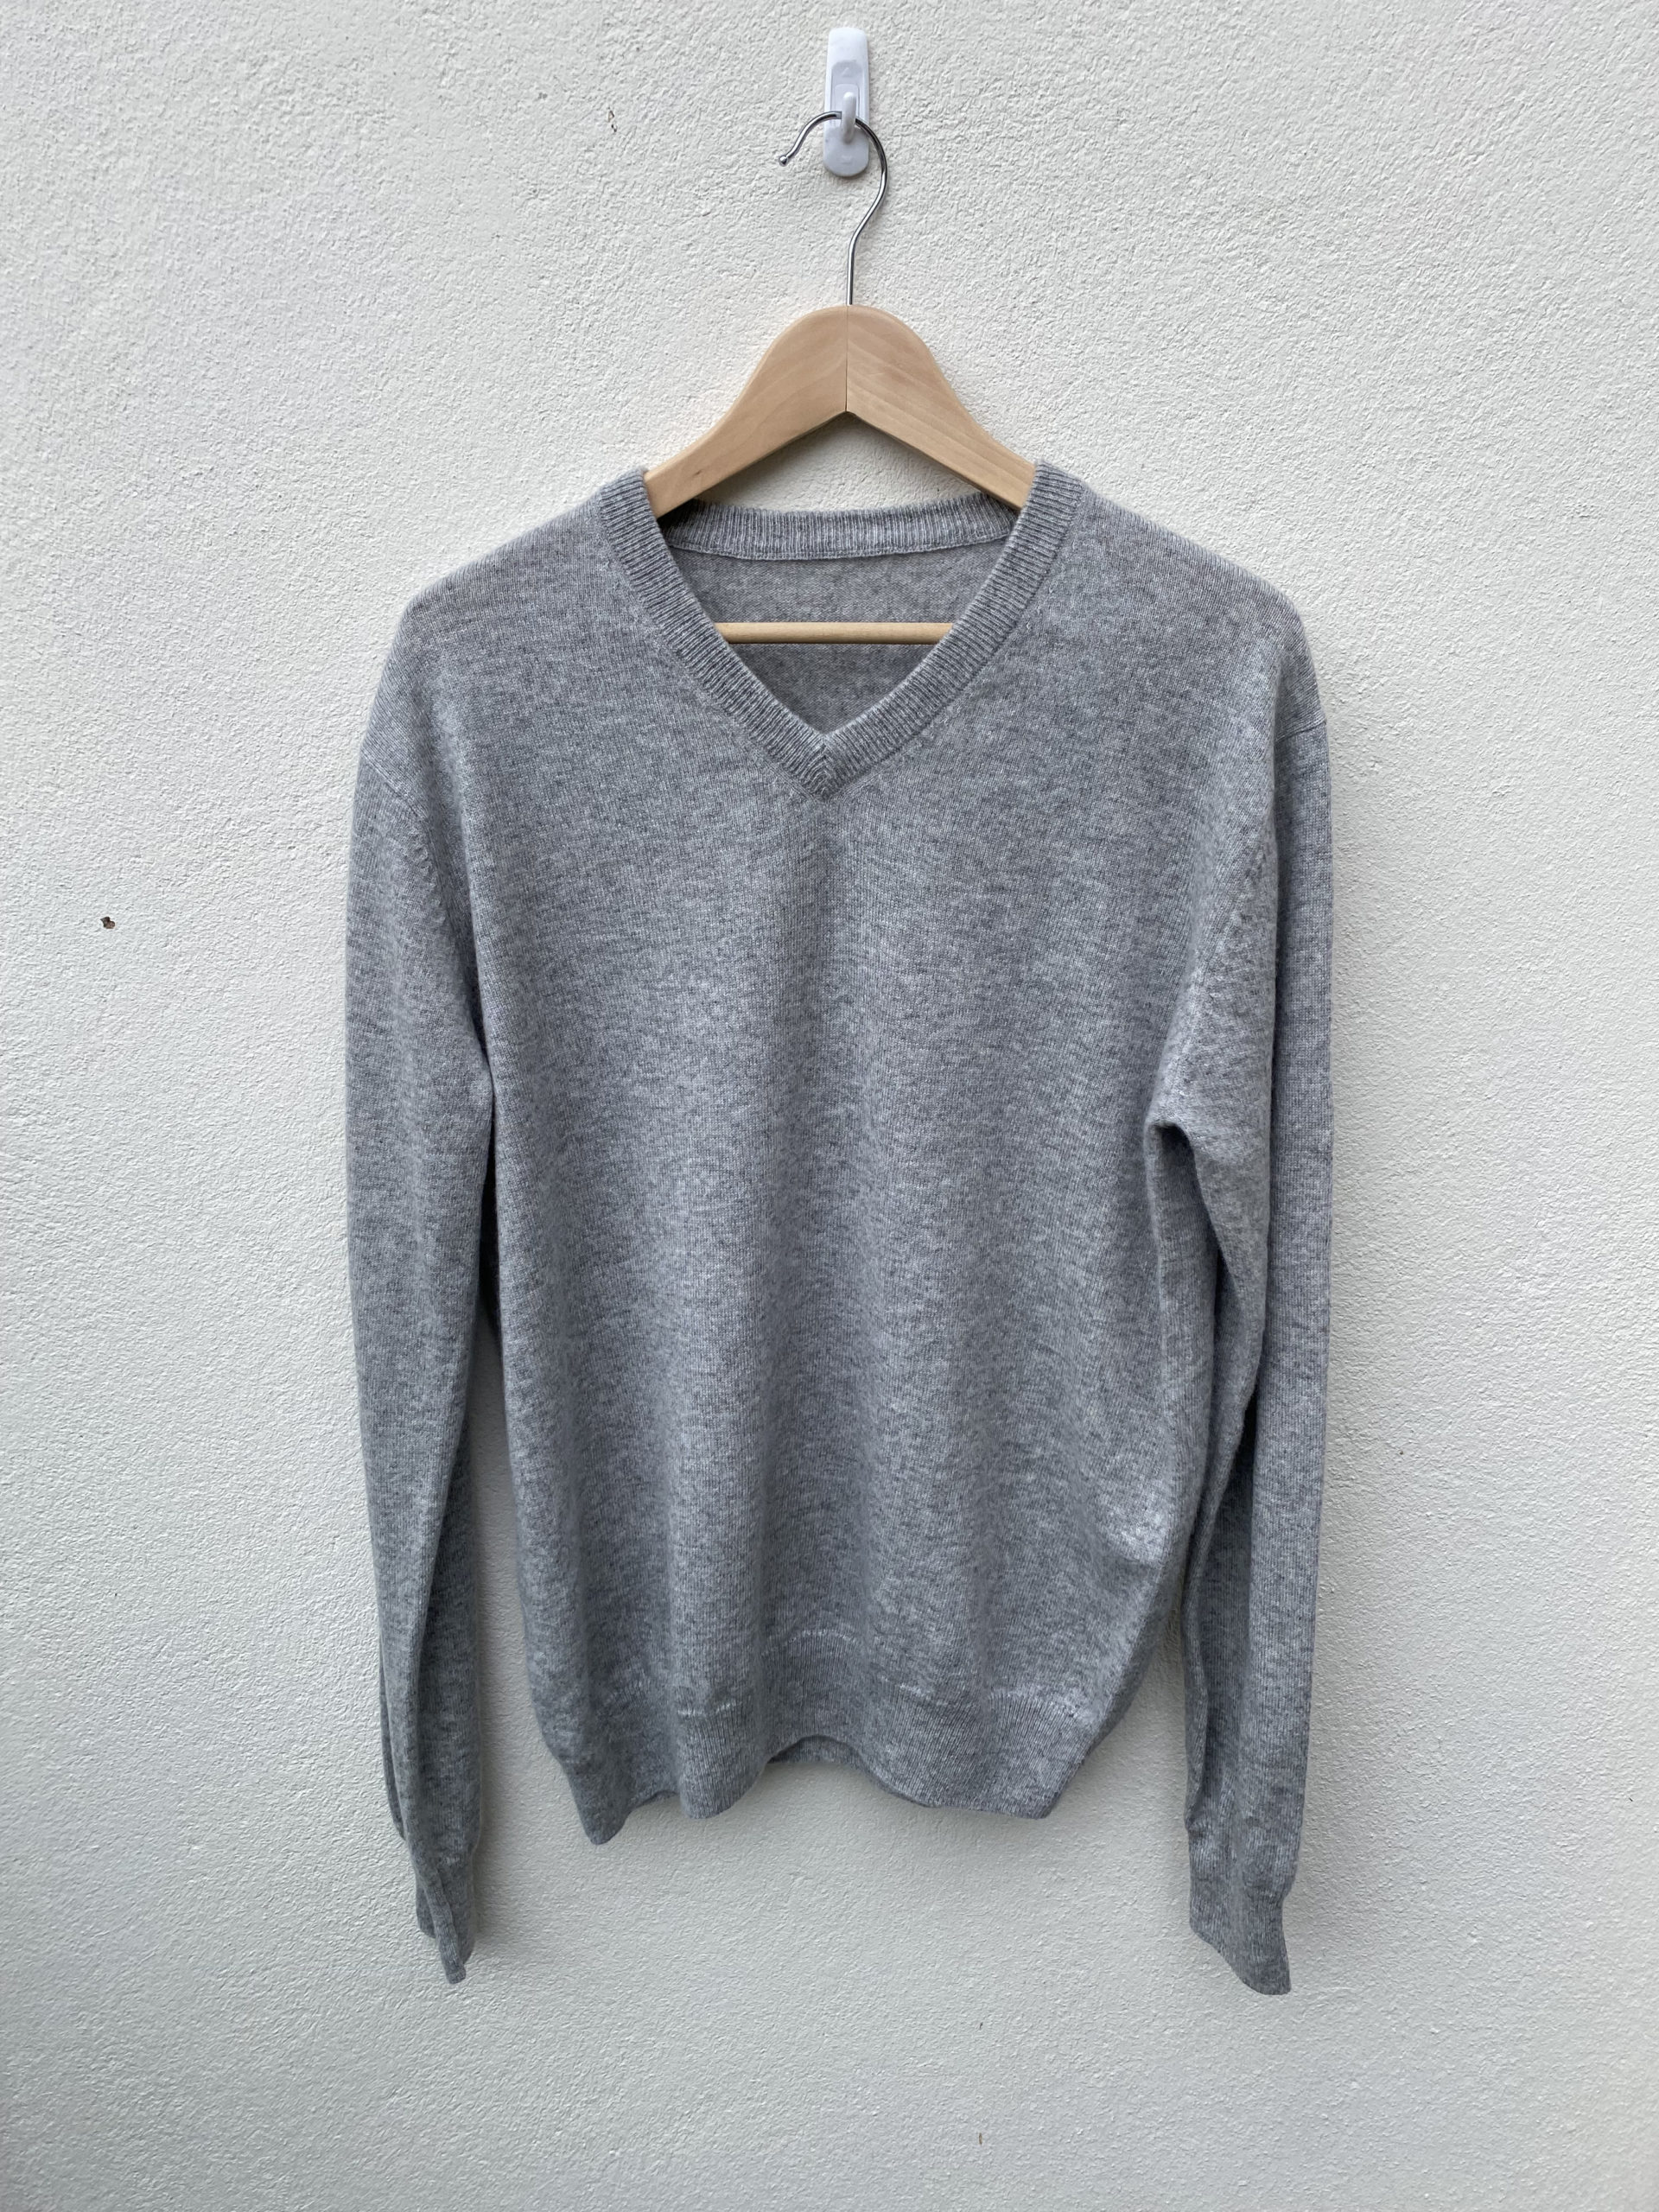 MEN’S CASHMERE SWEATER - Lonely Goat Cashmere